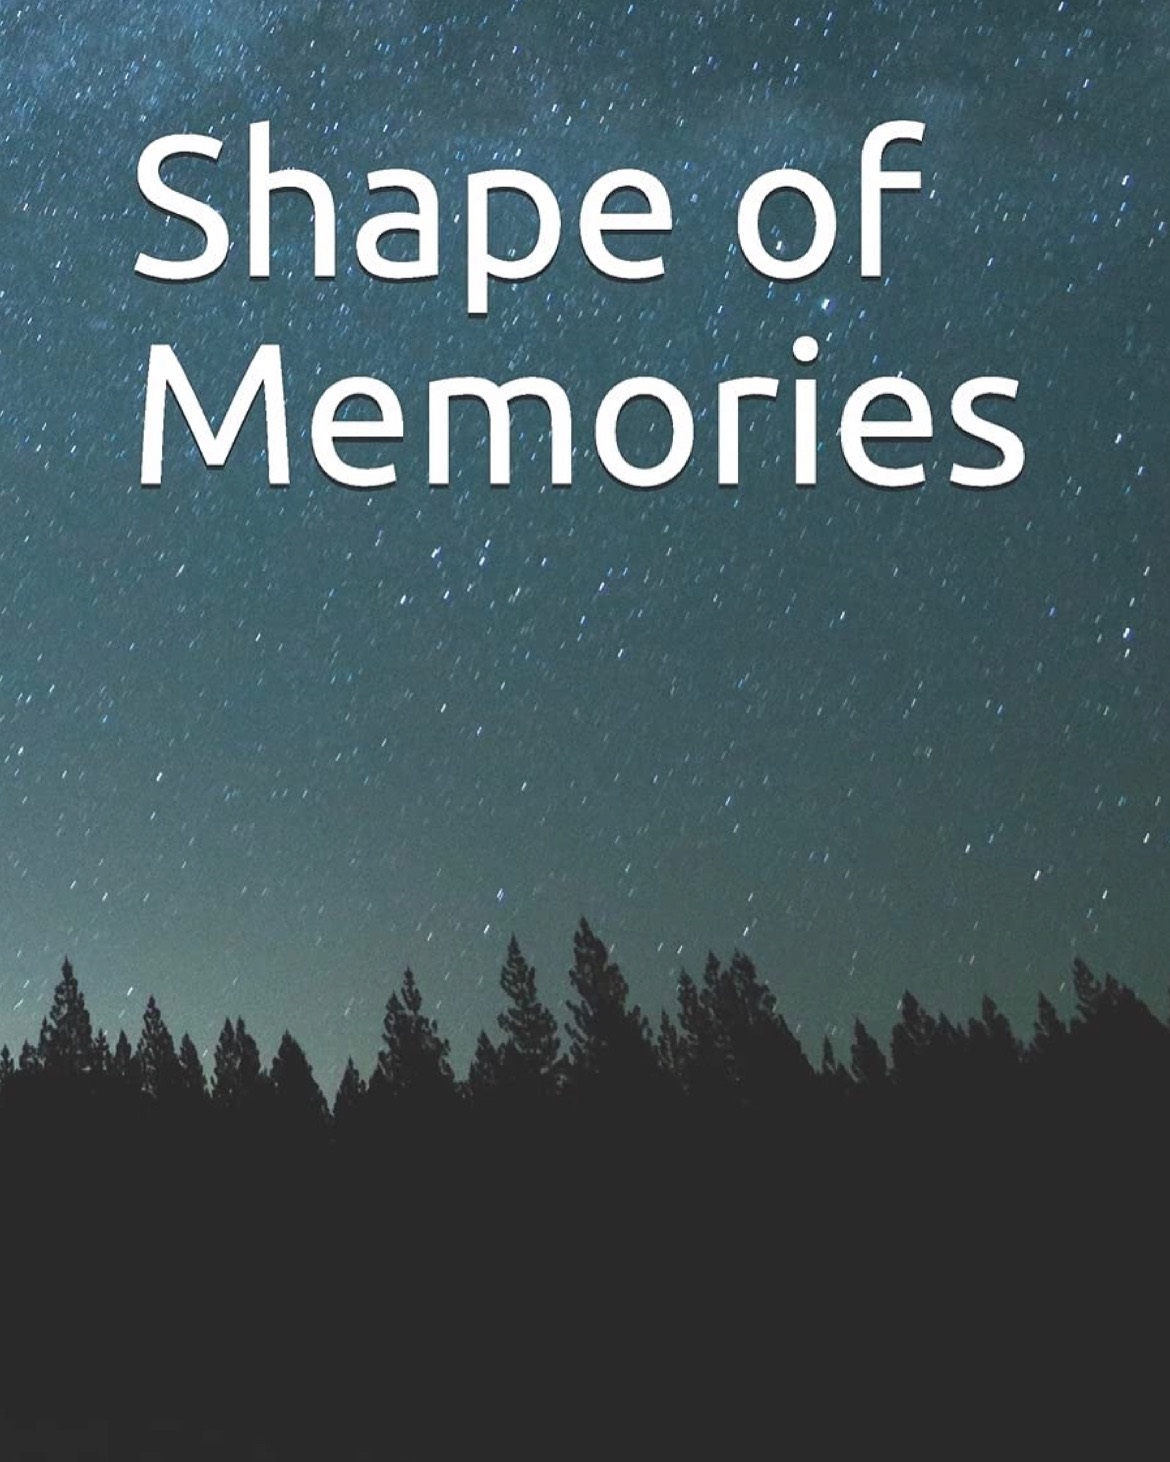 FREE: Shape of Memories by Kristofor Hellmeister